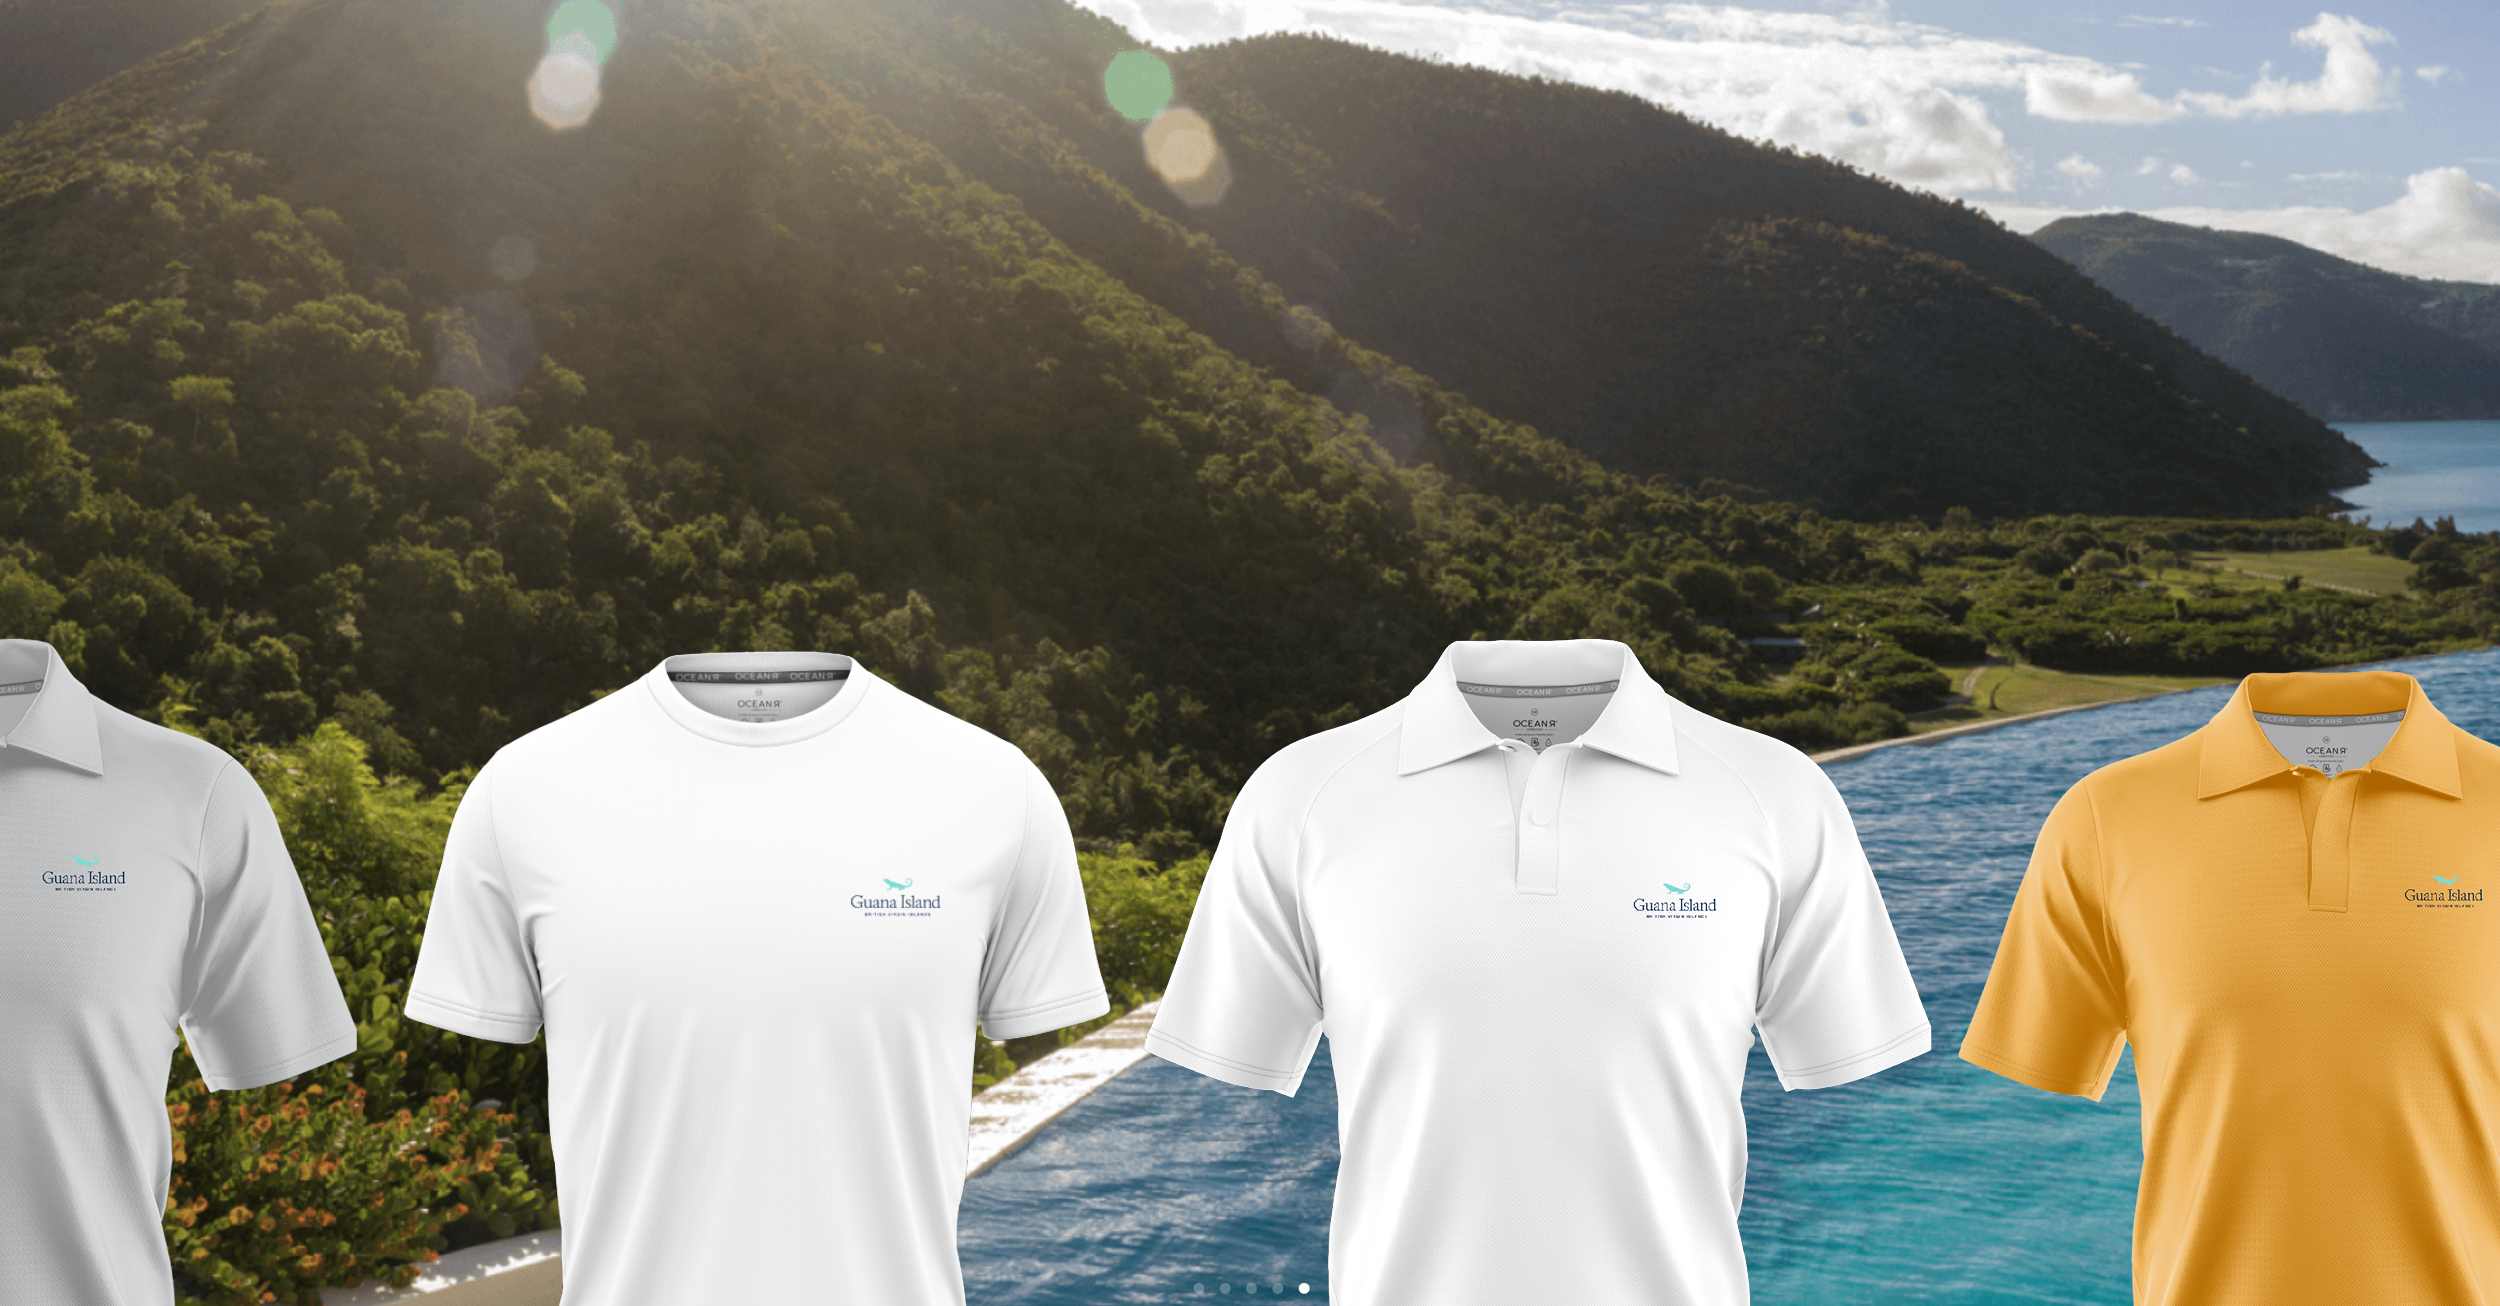 Guana Island X OceanR: Sustainable Branded Team Wear & Guest Boutique Gifts